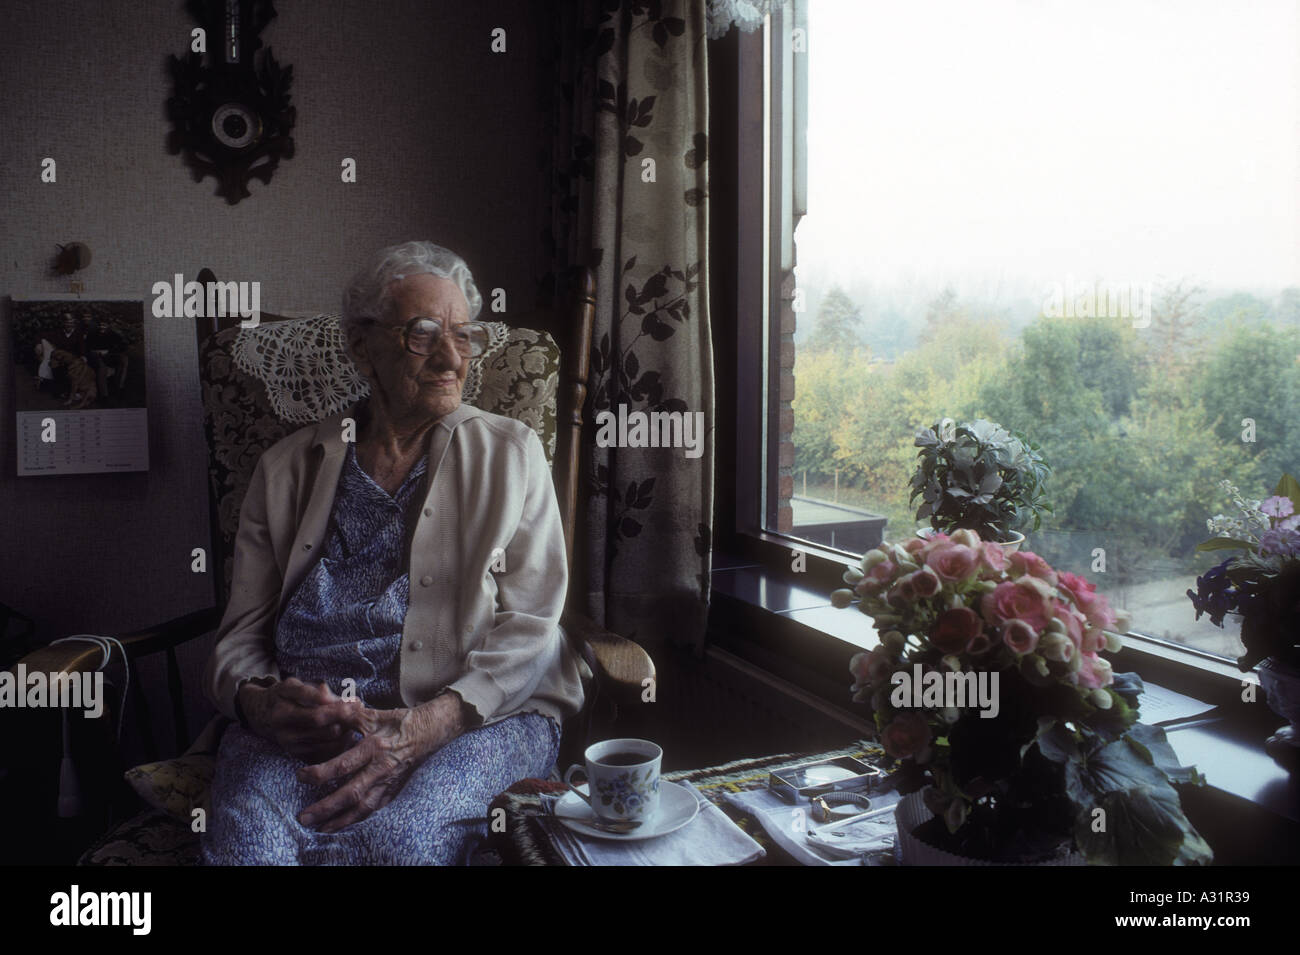 an elderly woman aged one hundred years old Stock Photo